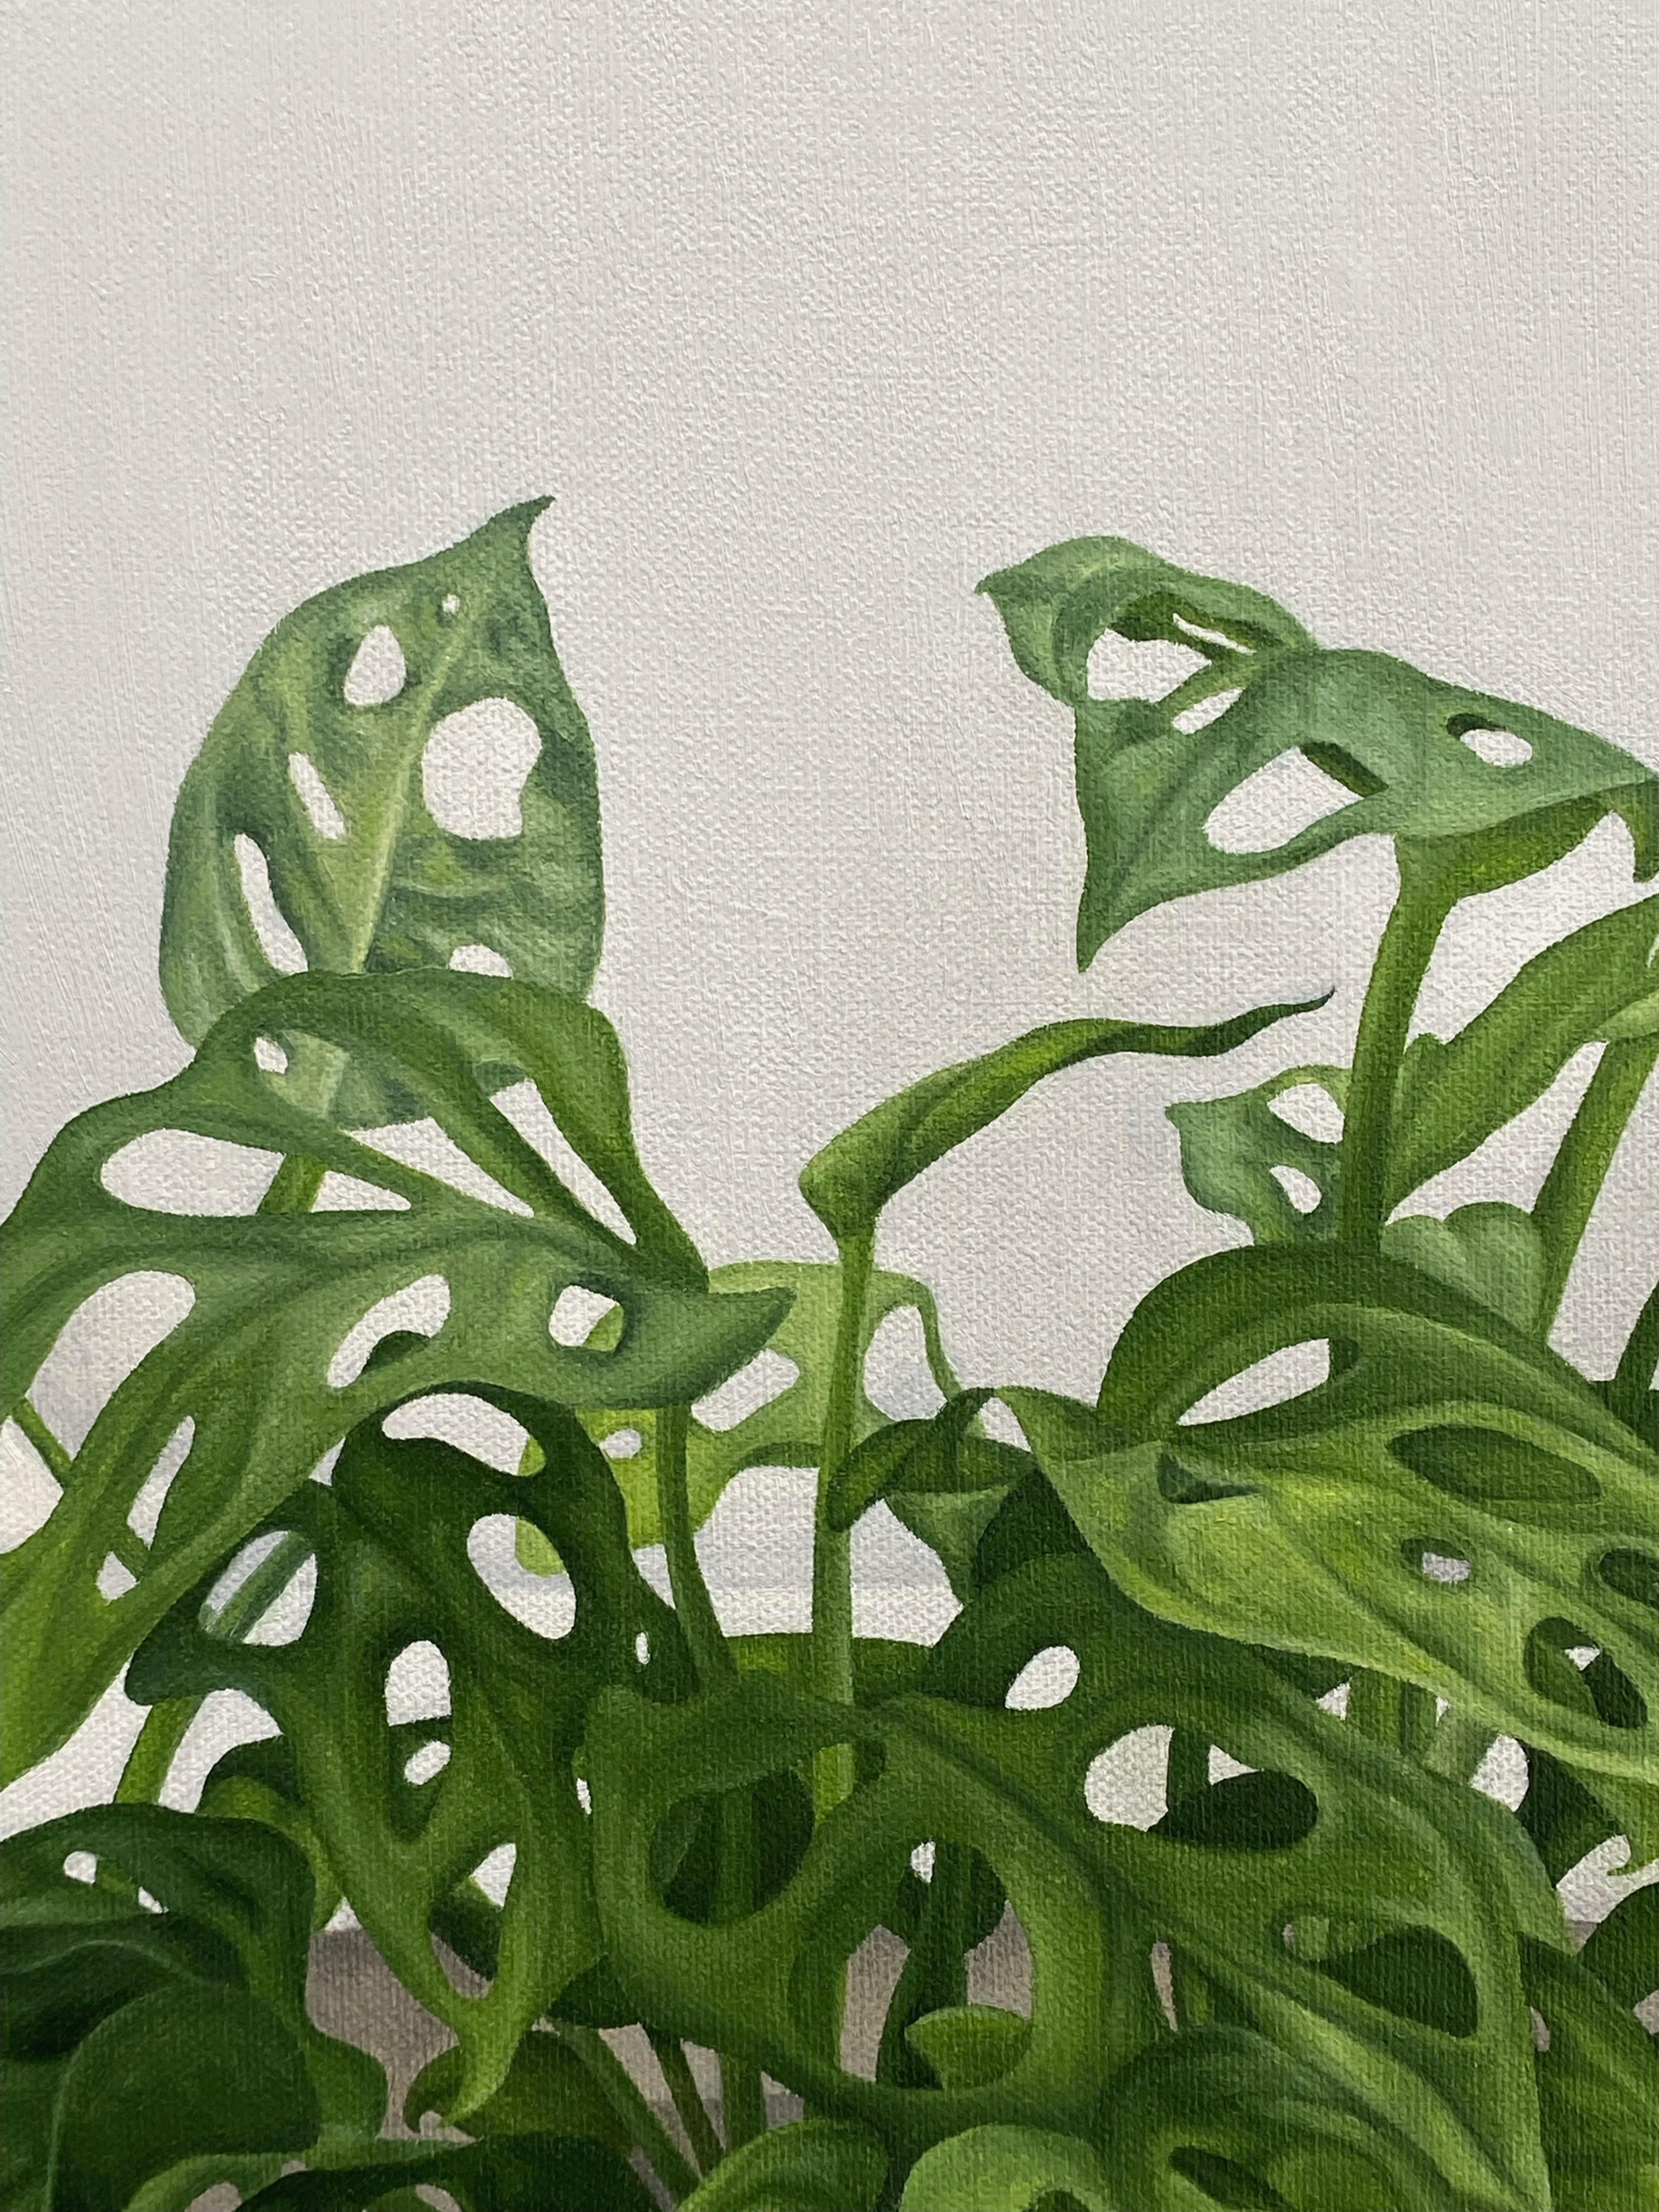 MONSTERA LATRINA - Oil Painting of Monstera Adansonii Growing From a Toilet - Gray Figurative Painting by Victoria Sauer